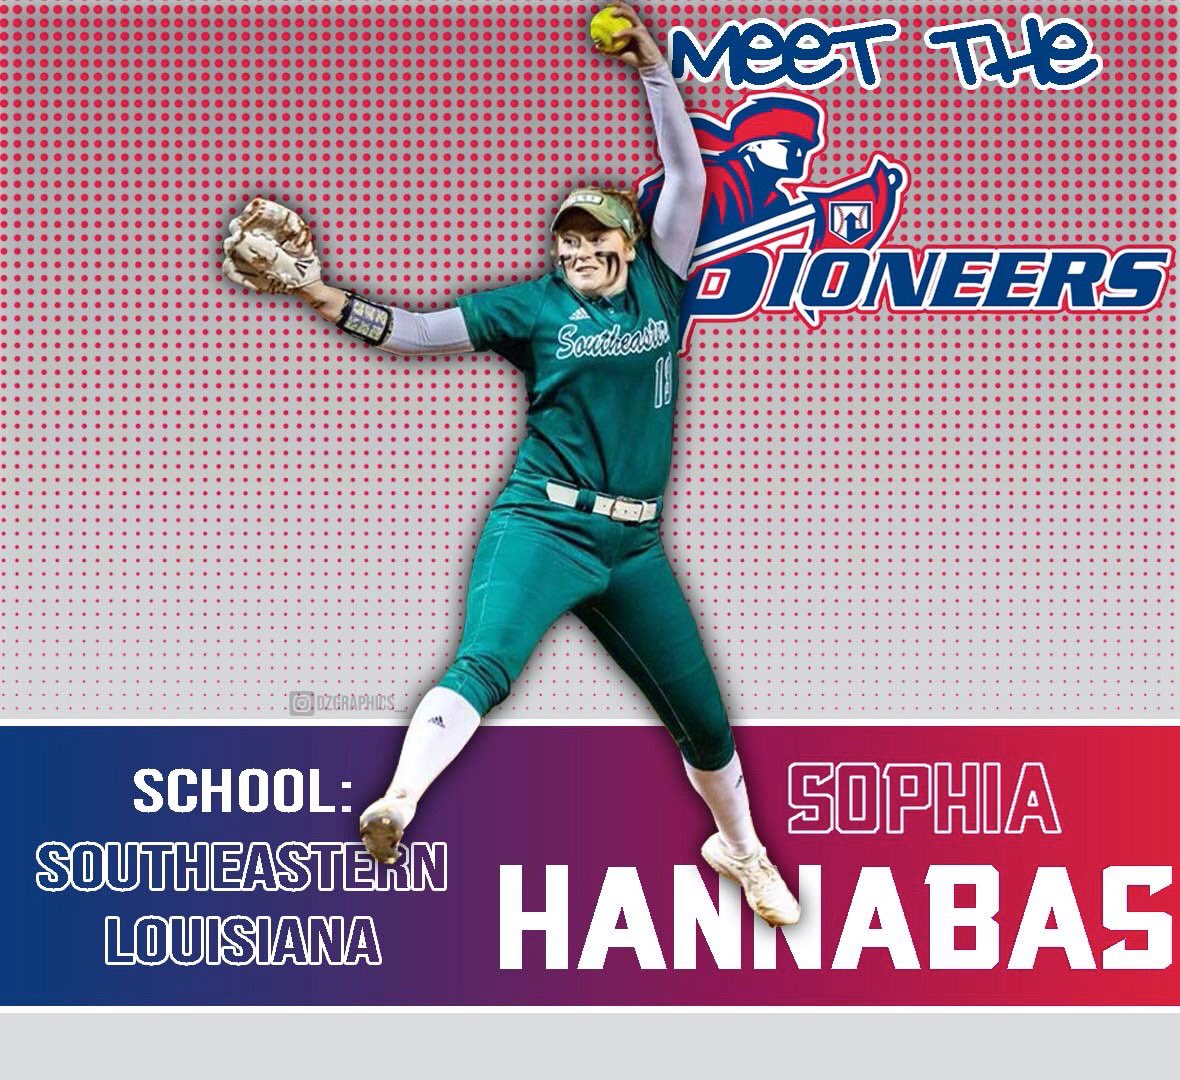 Meet the Pioneers! Today’s @SUAPioneersSB and @FGCLsoftball player spotlight goes to @imthe_rhb Lhp from Southeastern Louisiana